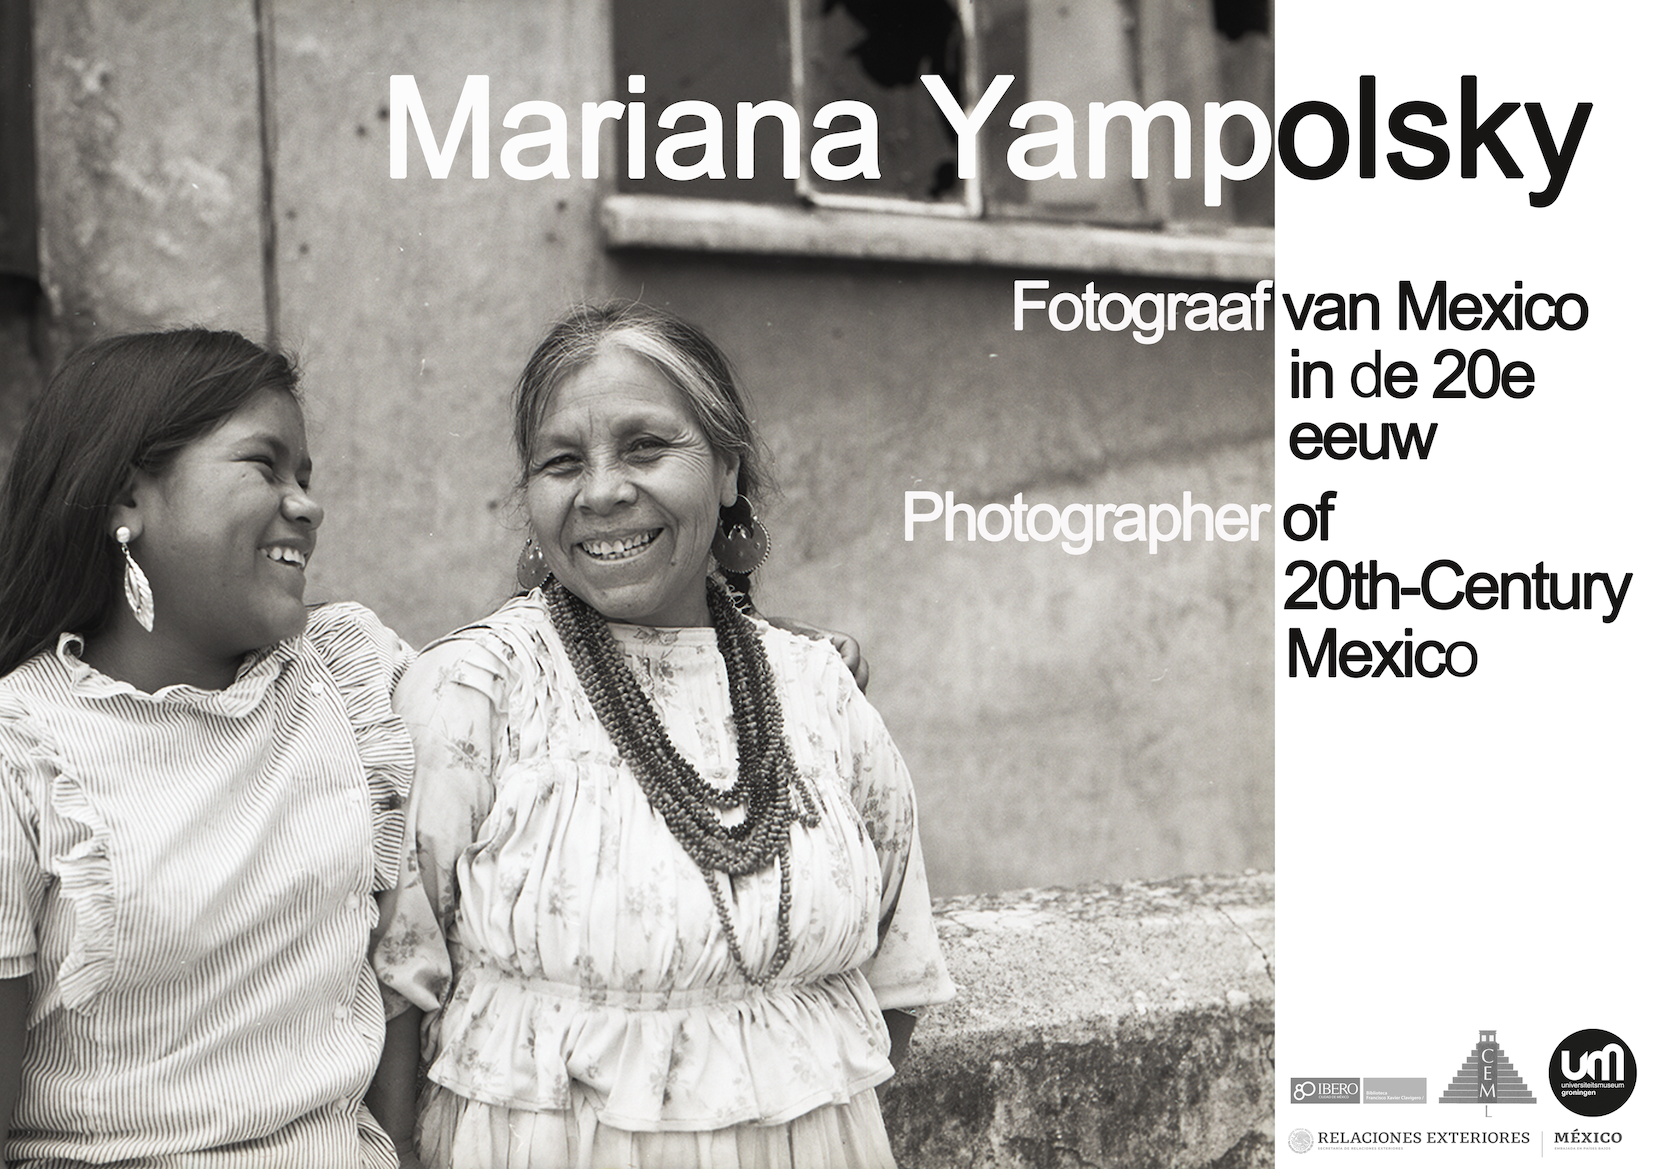 Flyer featuring a black and white photograph of two smiling Mexican women.